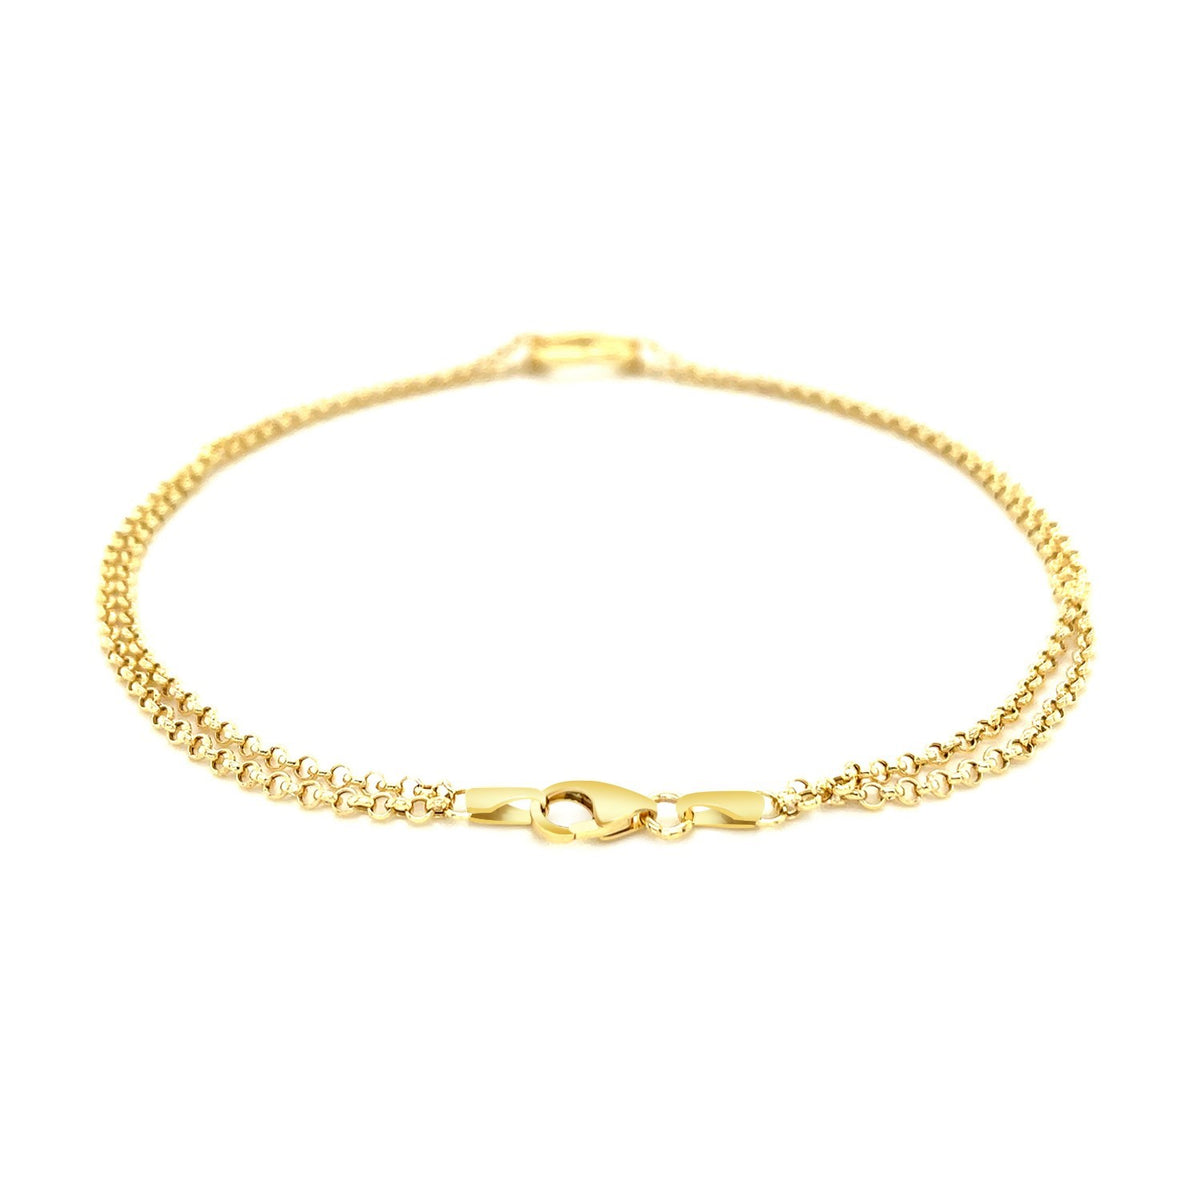 Double Rolo Chain Anklet with an Open Heart Station - 10k Yellow Gold